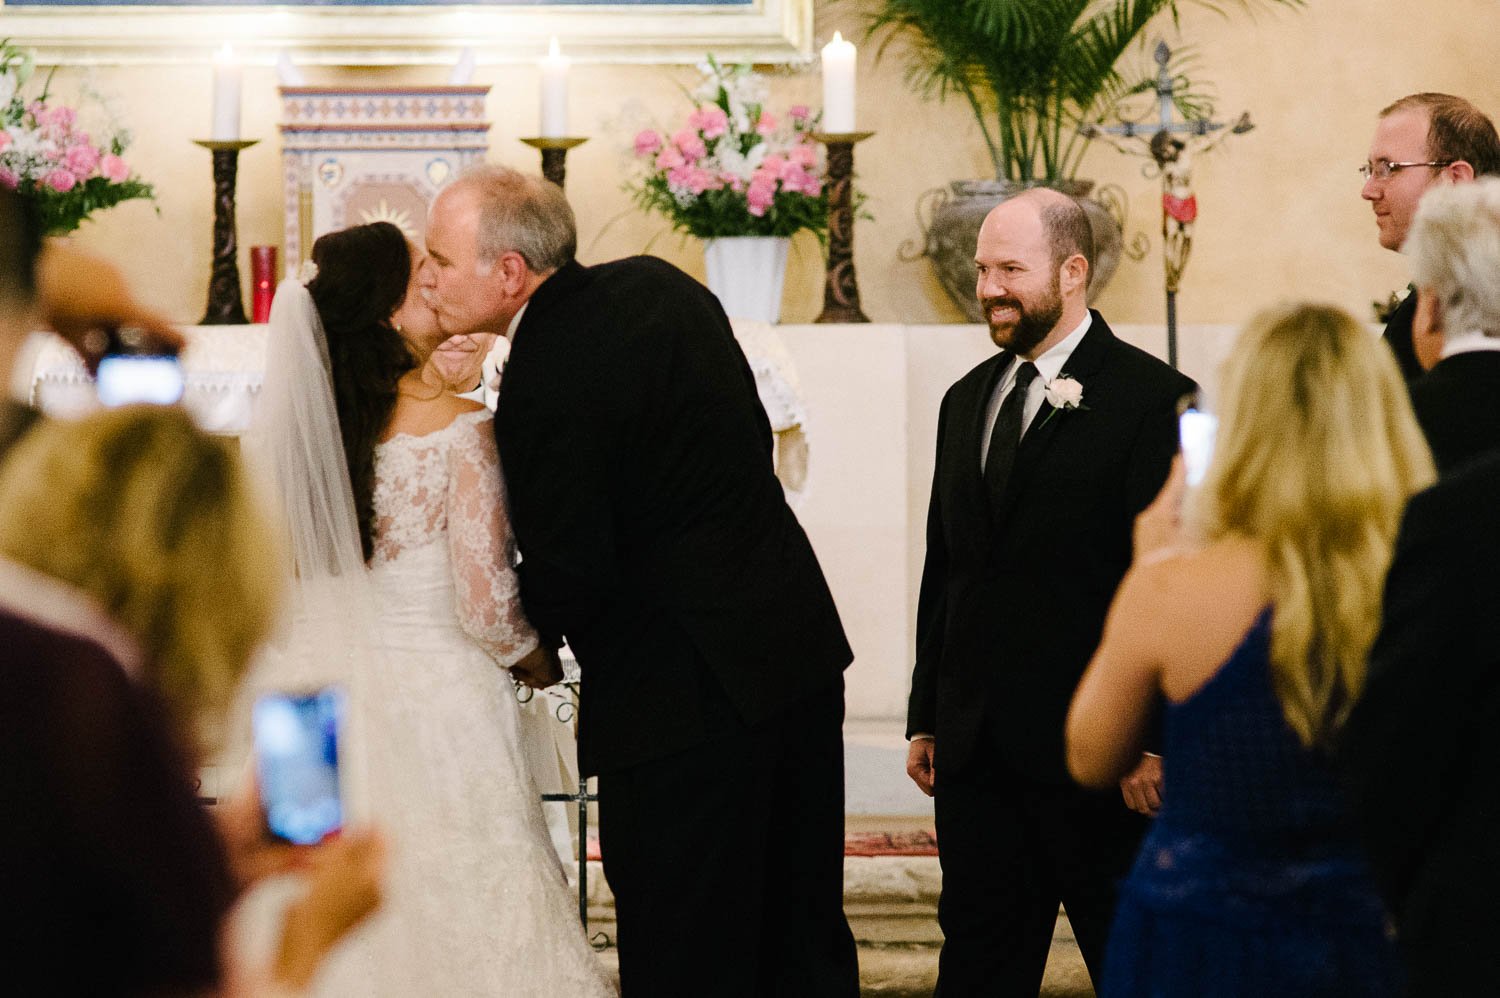 Father of the bride gives away his daughter to the groom at Mission Concepcion Wedding-Leica photographer-Philip Thomas Photography